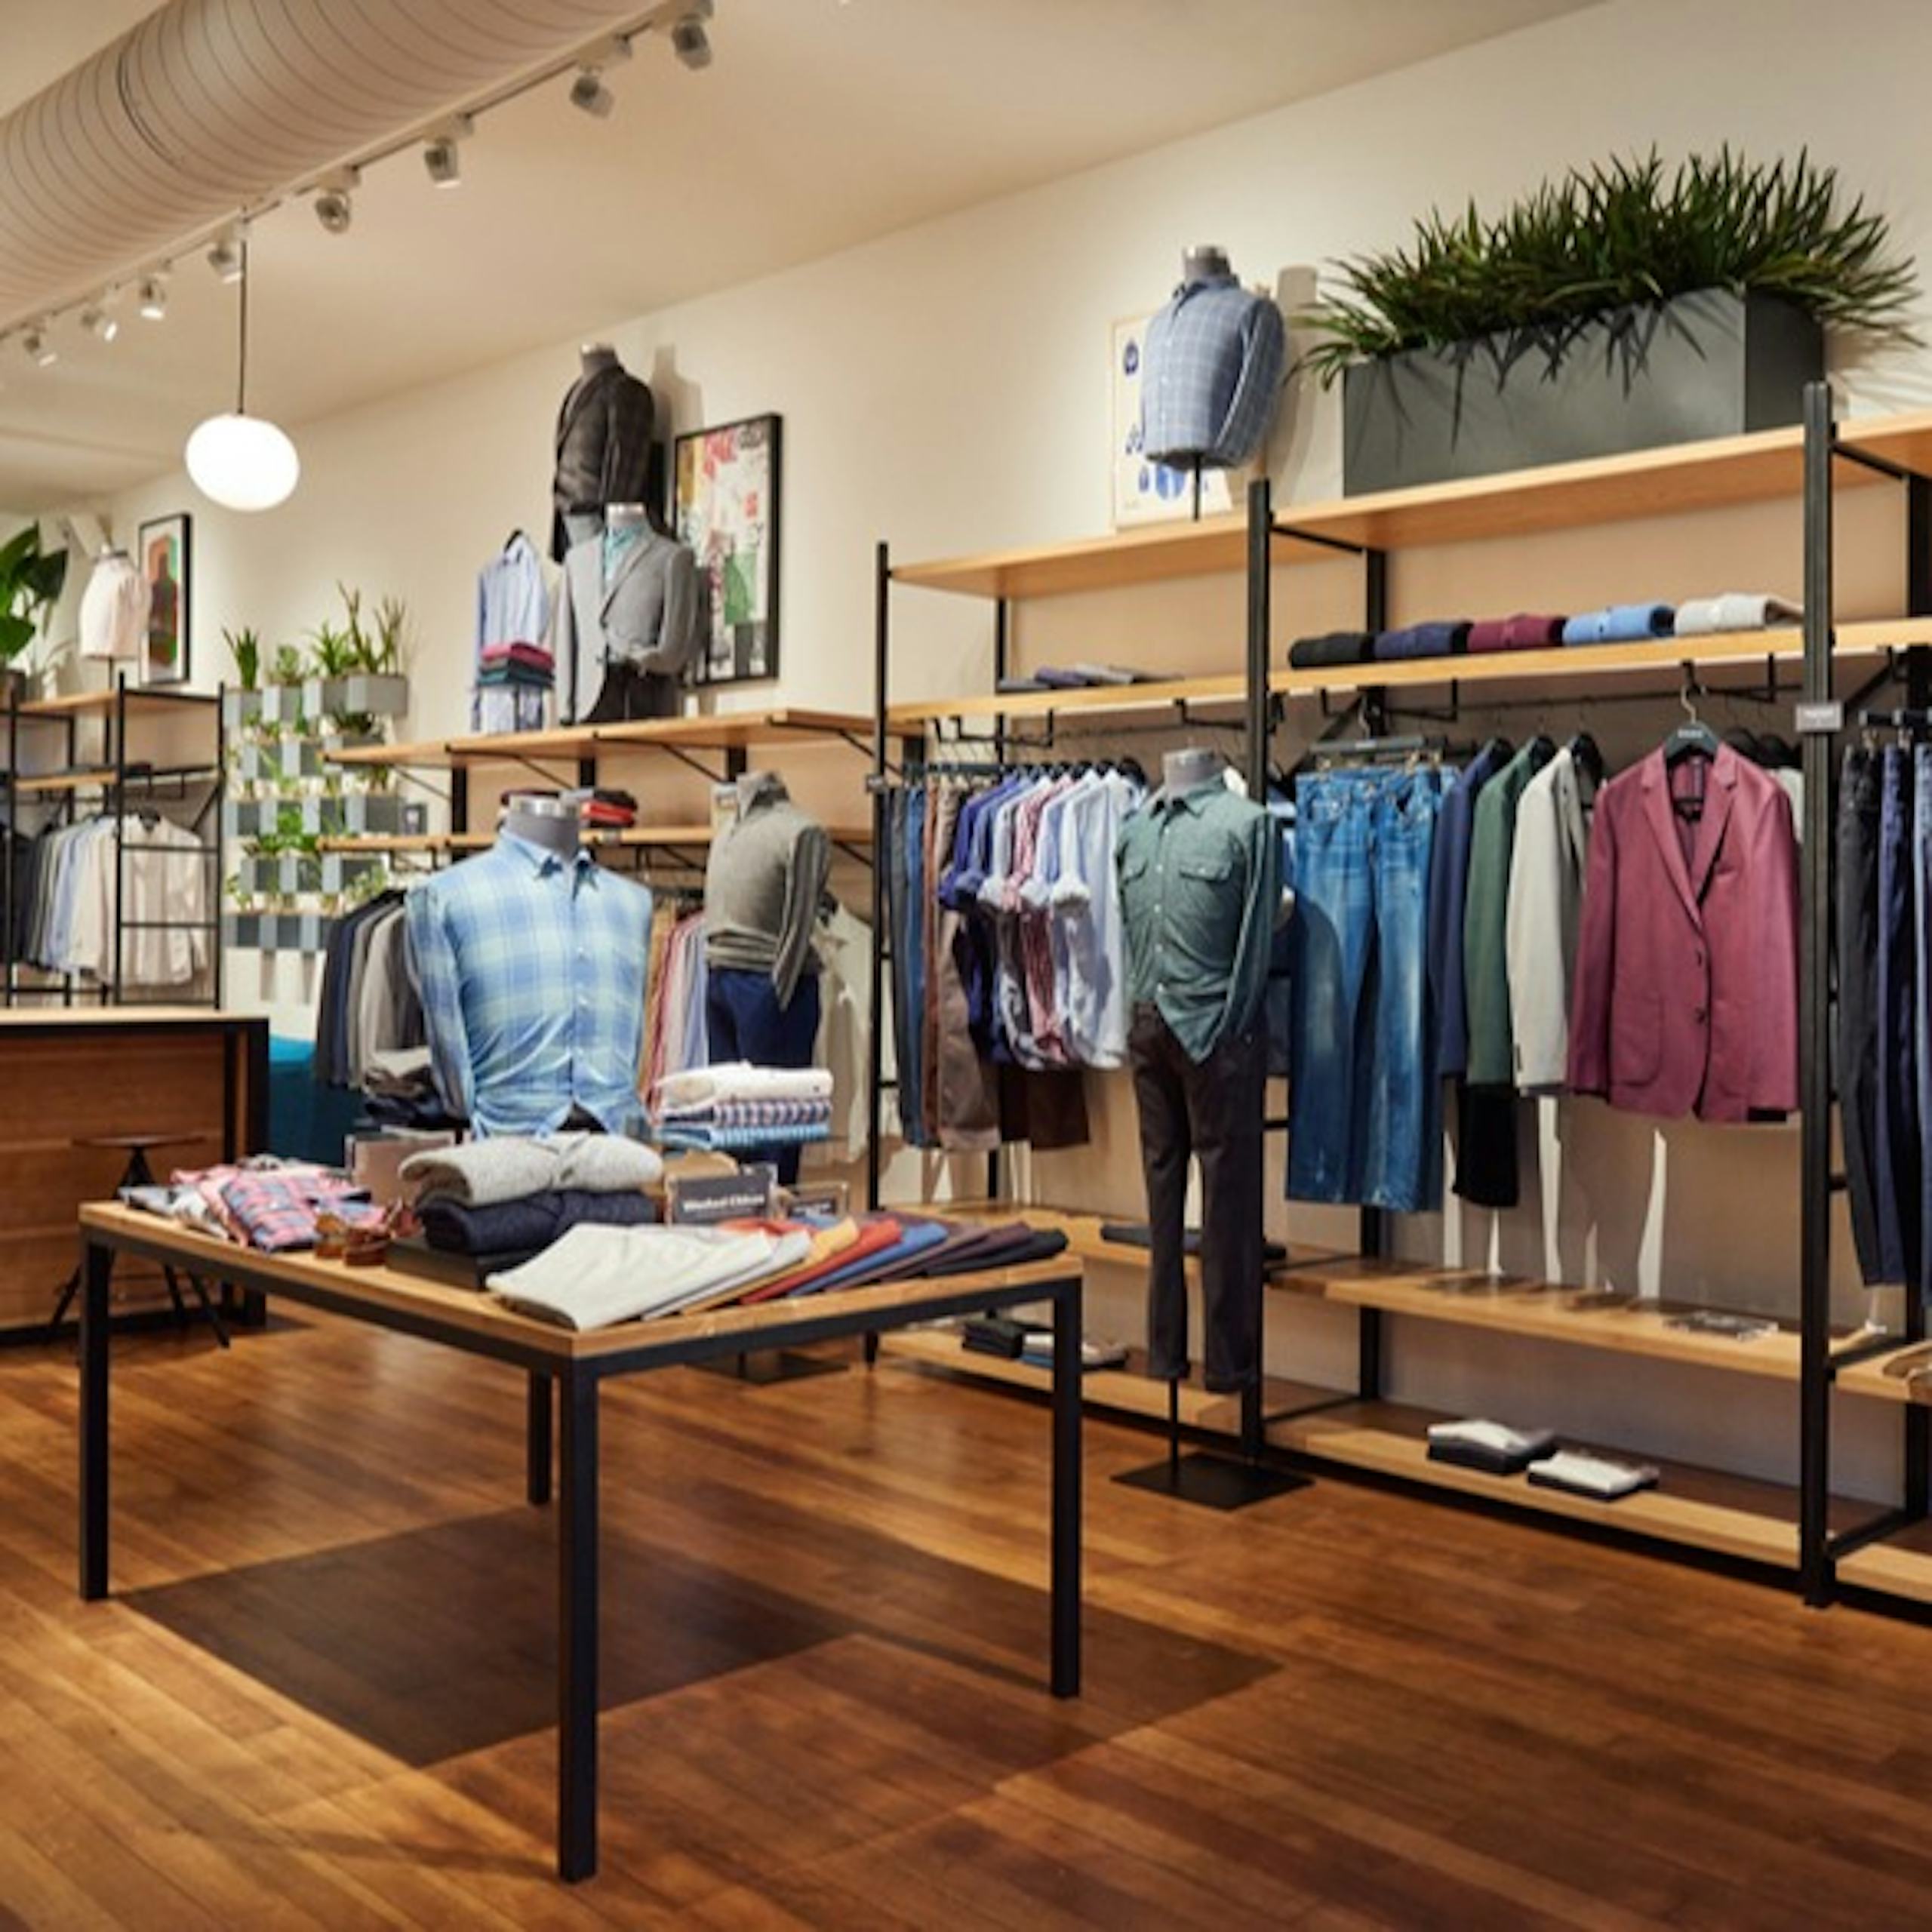 Image of Bonobos Cow Hollow store display. 